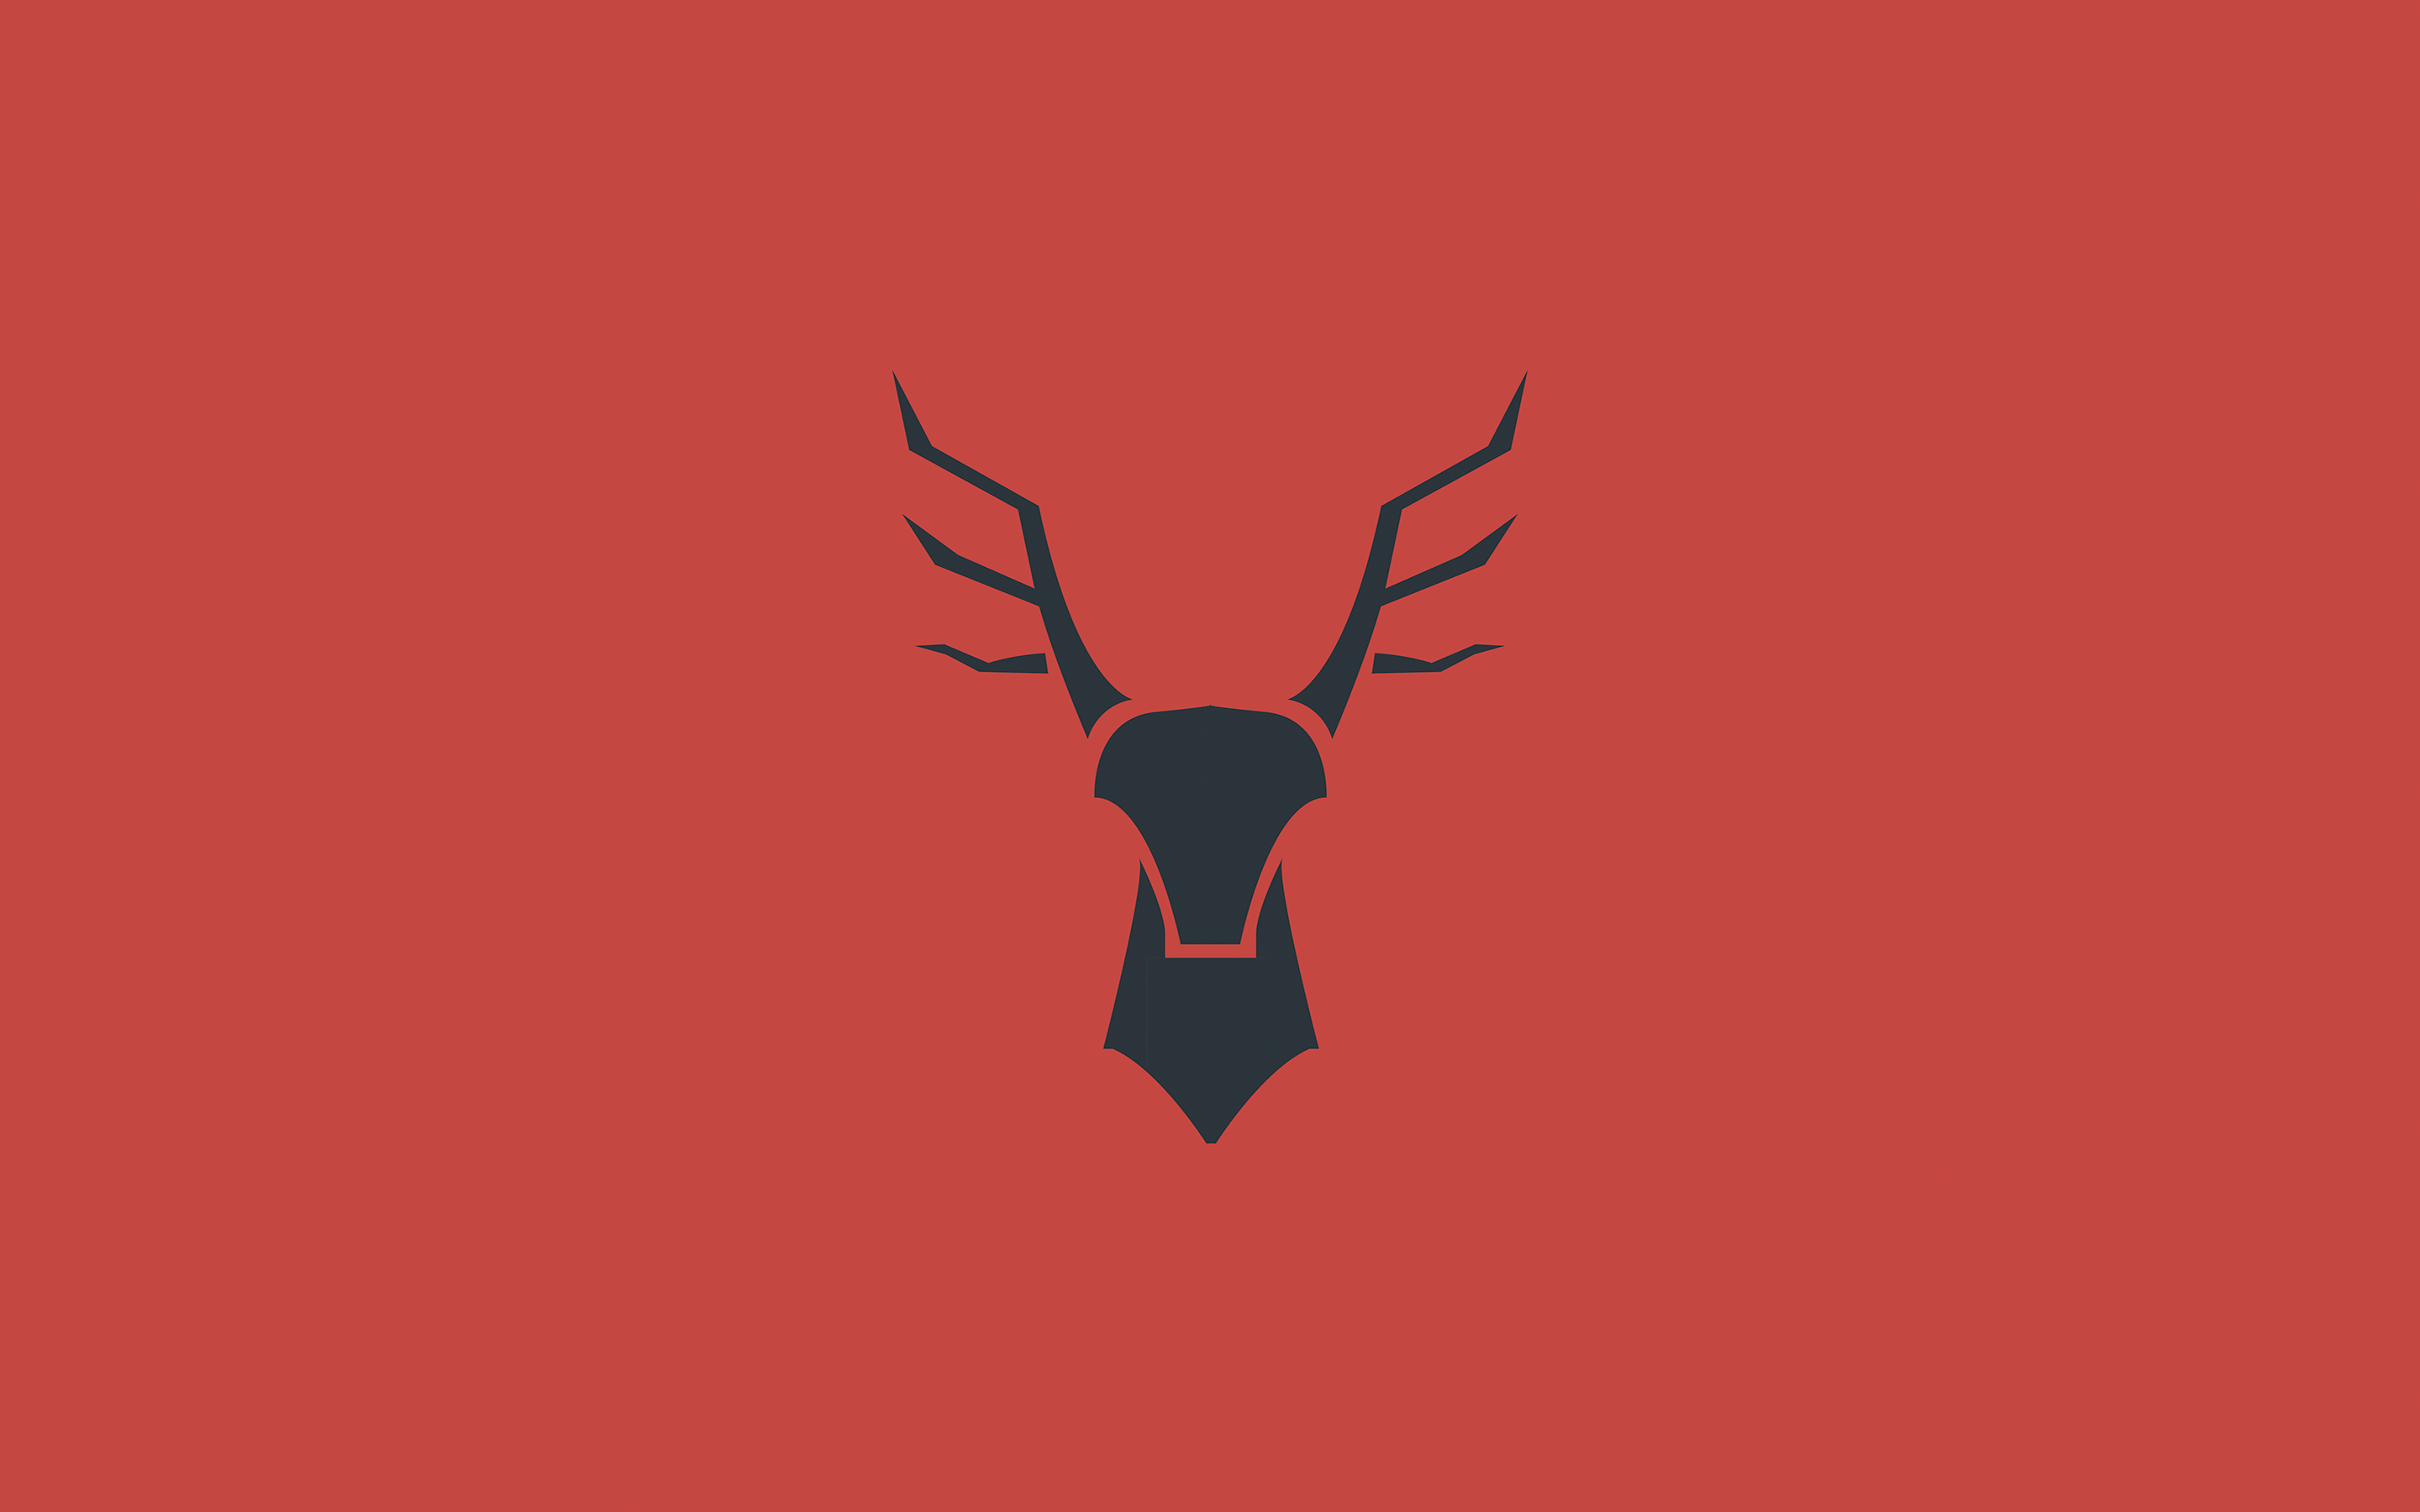 General 2880x1800 deer animals abstract red background simple background mammals minimalism